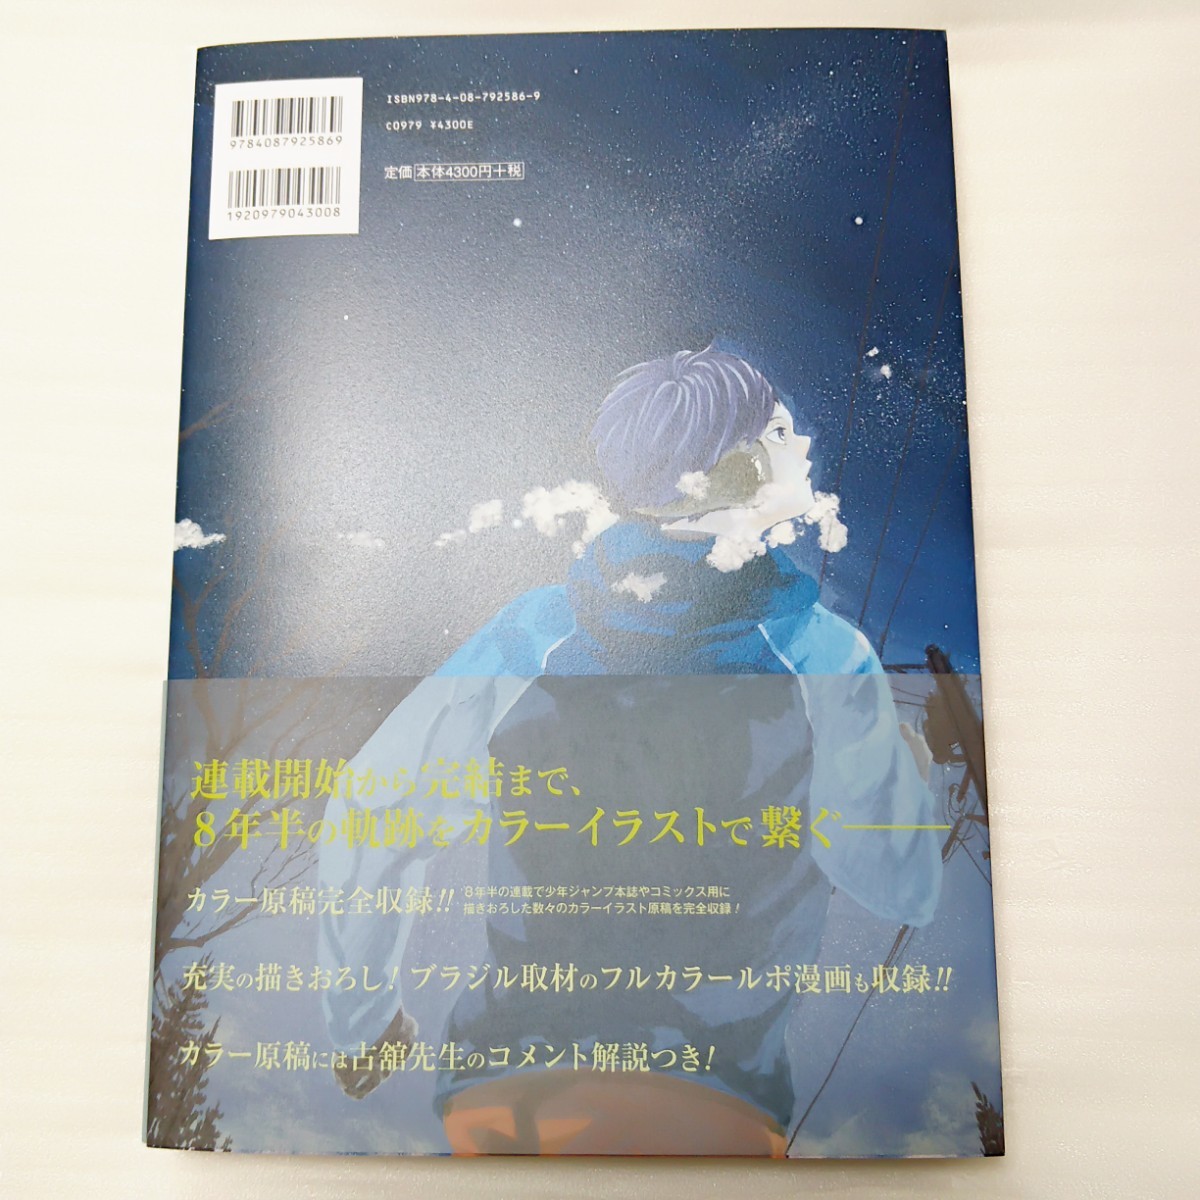 Paypayフリマ ハイキュー Complete Illustration Book終わりと始まり 古館春一 大判画集